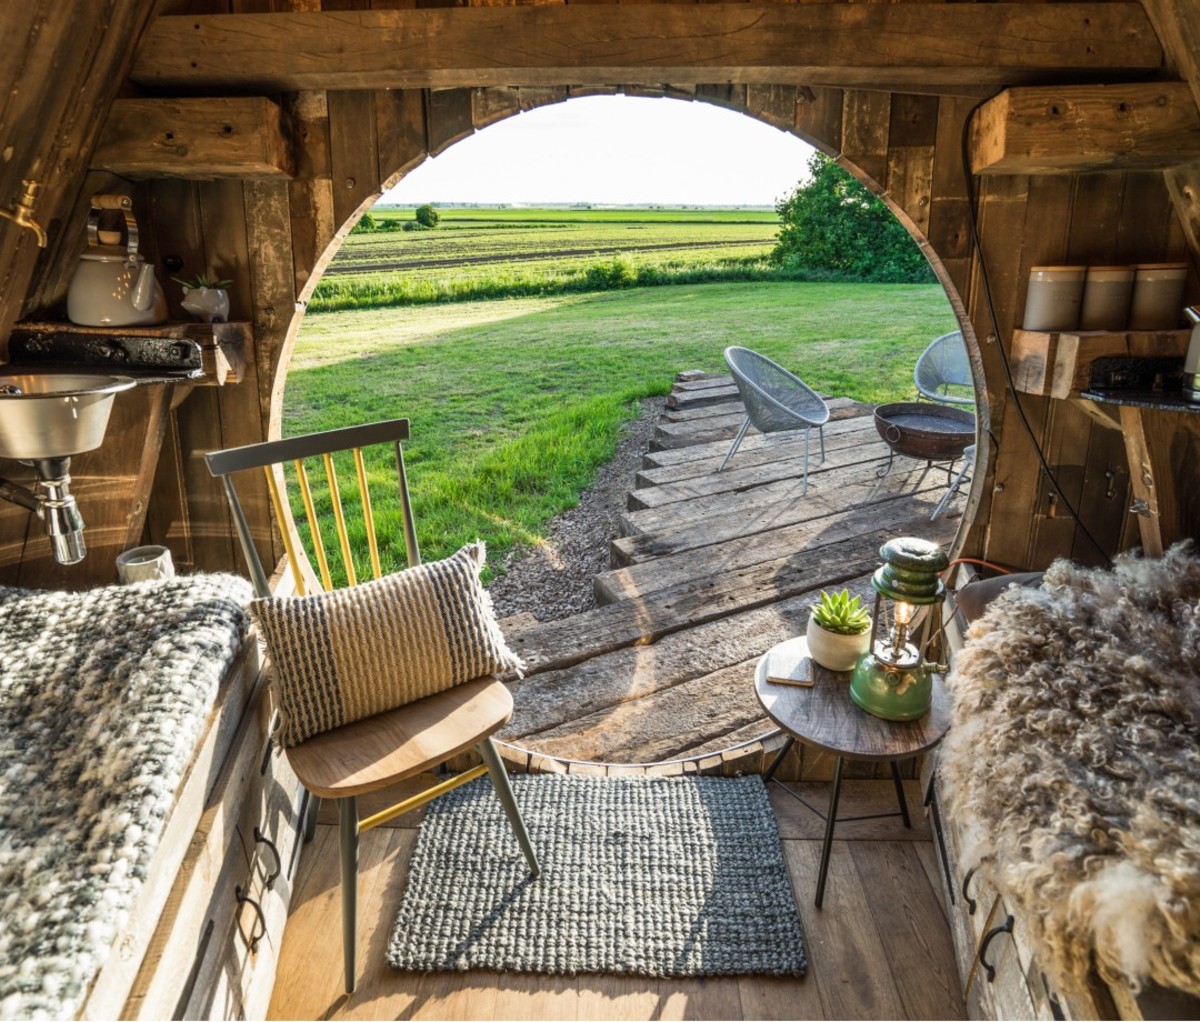 Unique Glamping Experience, Sutton, UK